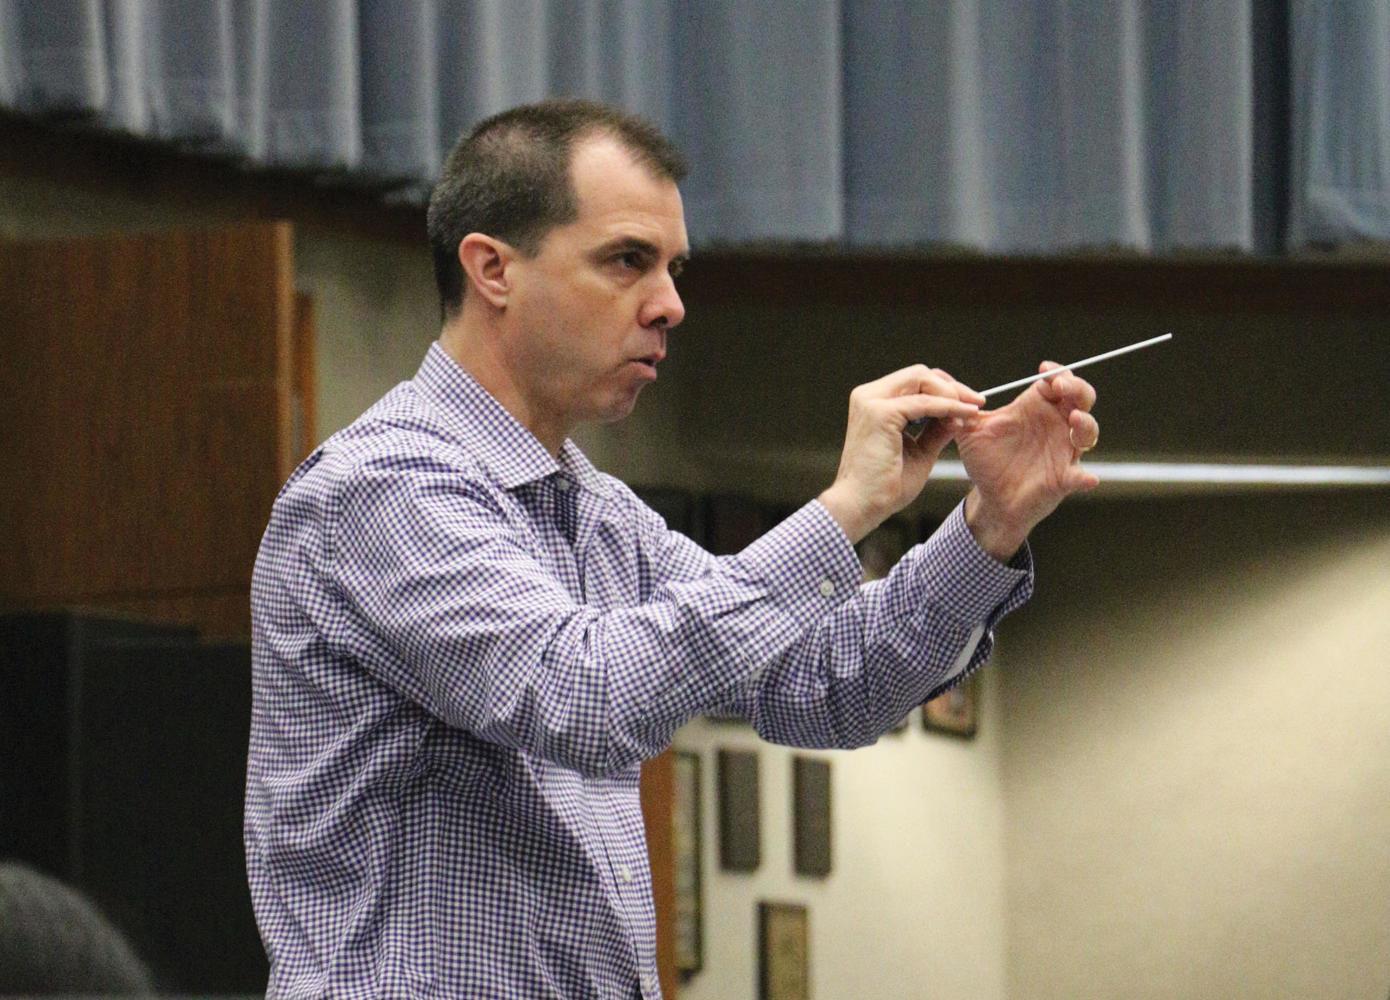 Band+director+Michael+Pote+conducts+Wind+Symphony+I+before+school+prior+to+the+group%E2%80%99s+ISSMA+state+final+performance.+This+year%2C+Pote+has+been+working+diligently+with+all+the+bands+to+play+their+music+to+the+best+of+%0Atheir+abilities.